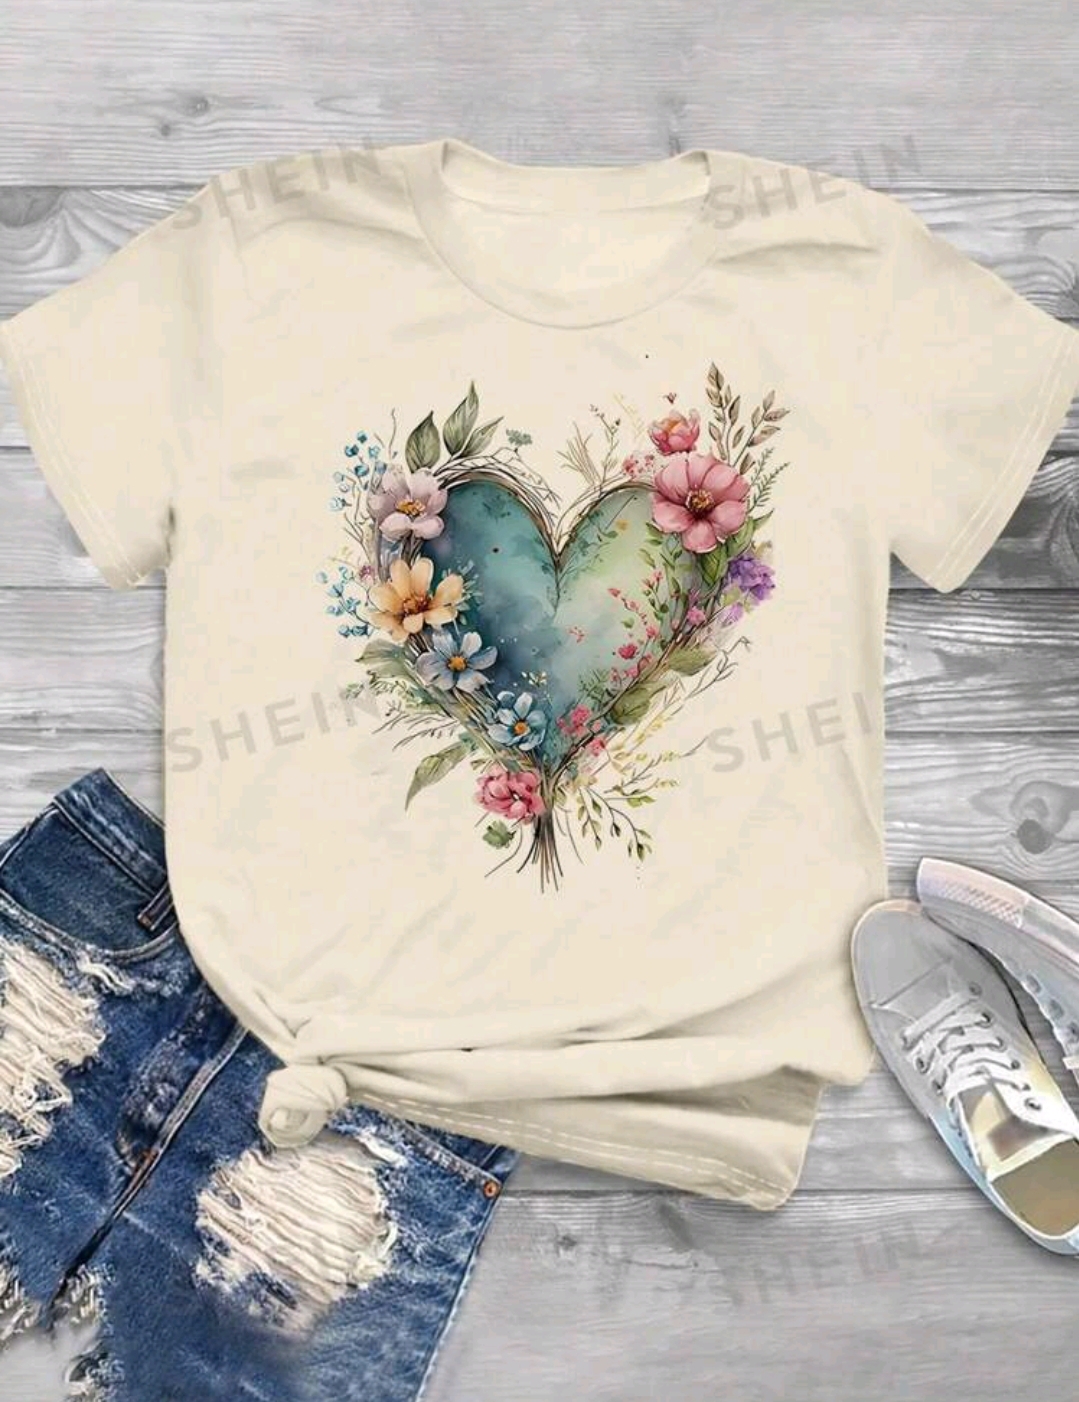 SHEIN LUNE Casual Short Sleeve T-Shirt With Heart & Flower Patterned Round Neck